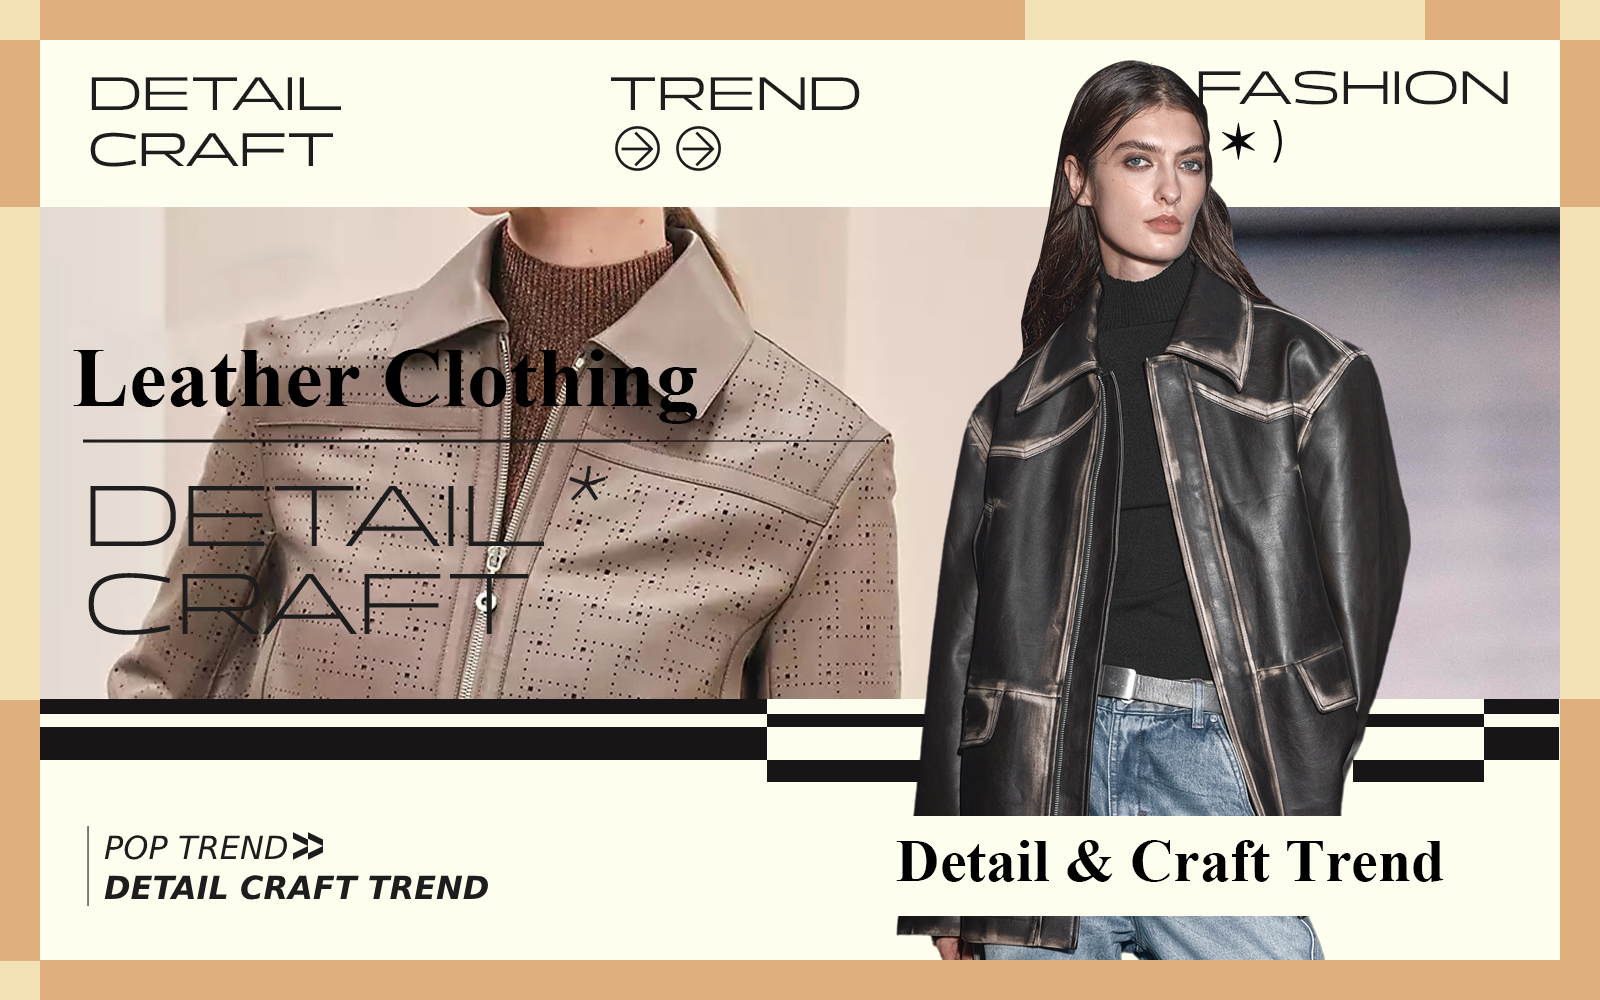 The Detail & Craft Trend for Women's Leather Clothing